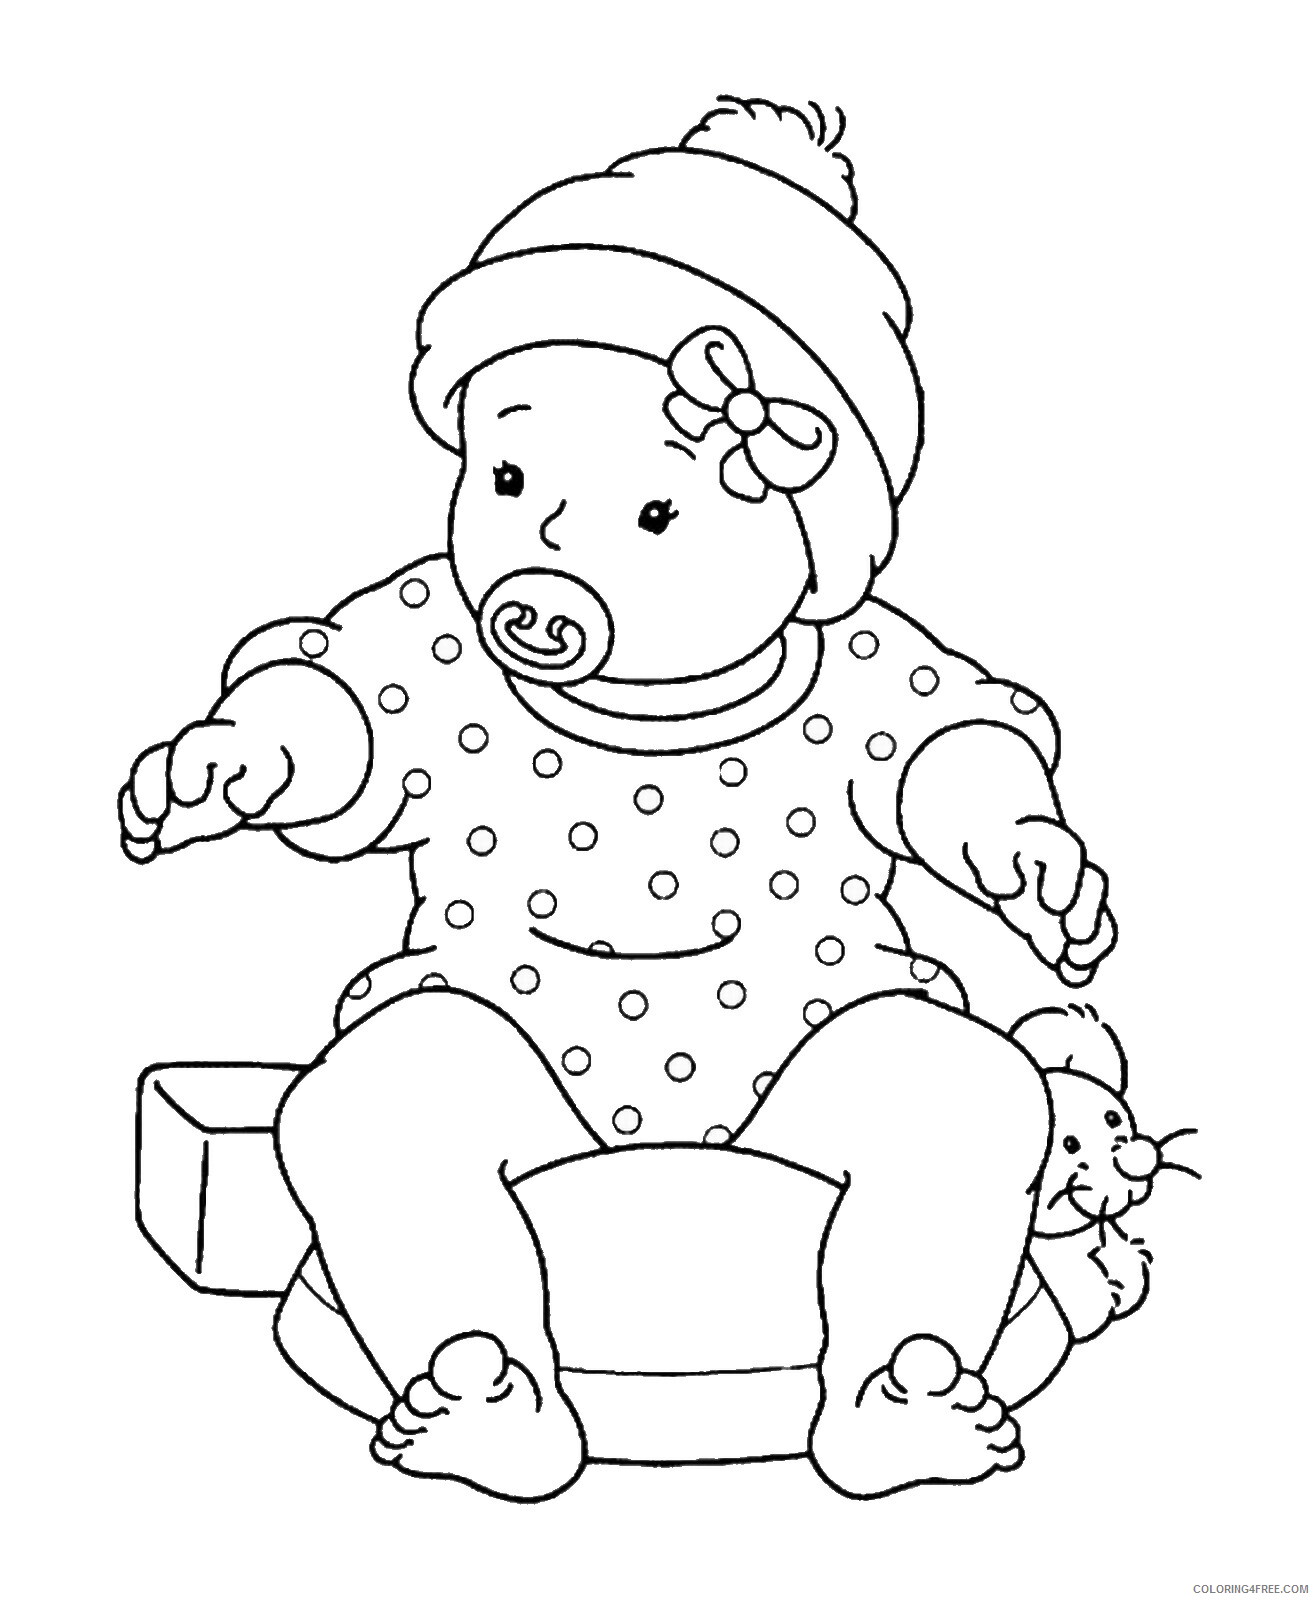 Doll Coloring Pages for Girls dolls_02 Printable 2021 0371 Coloring4free